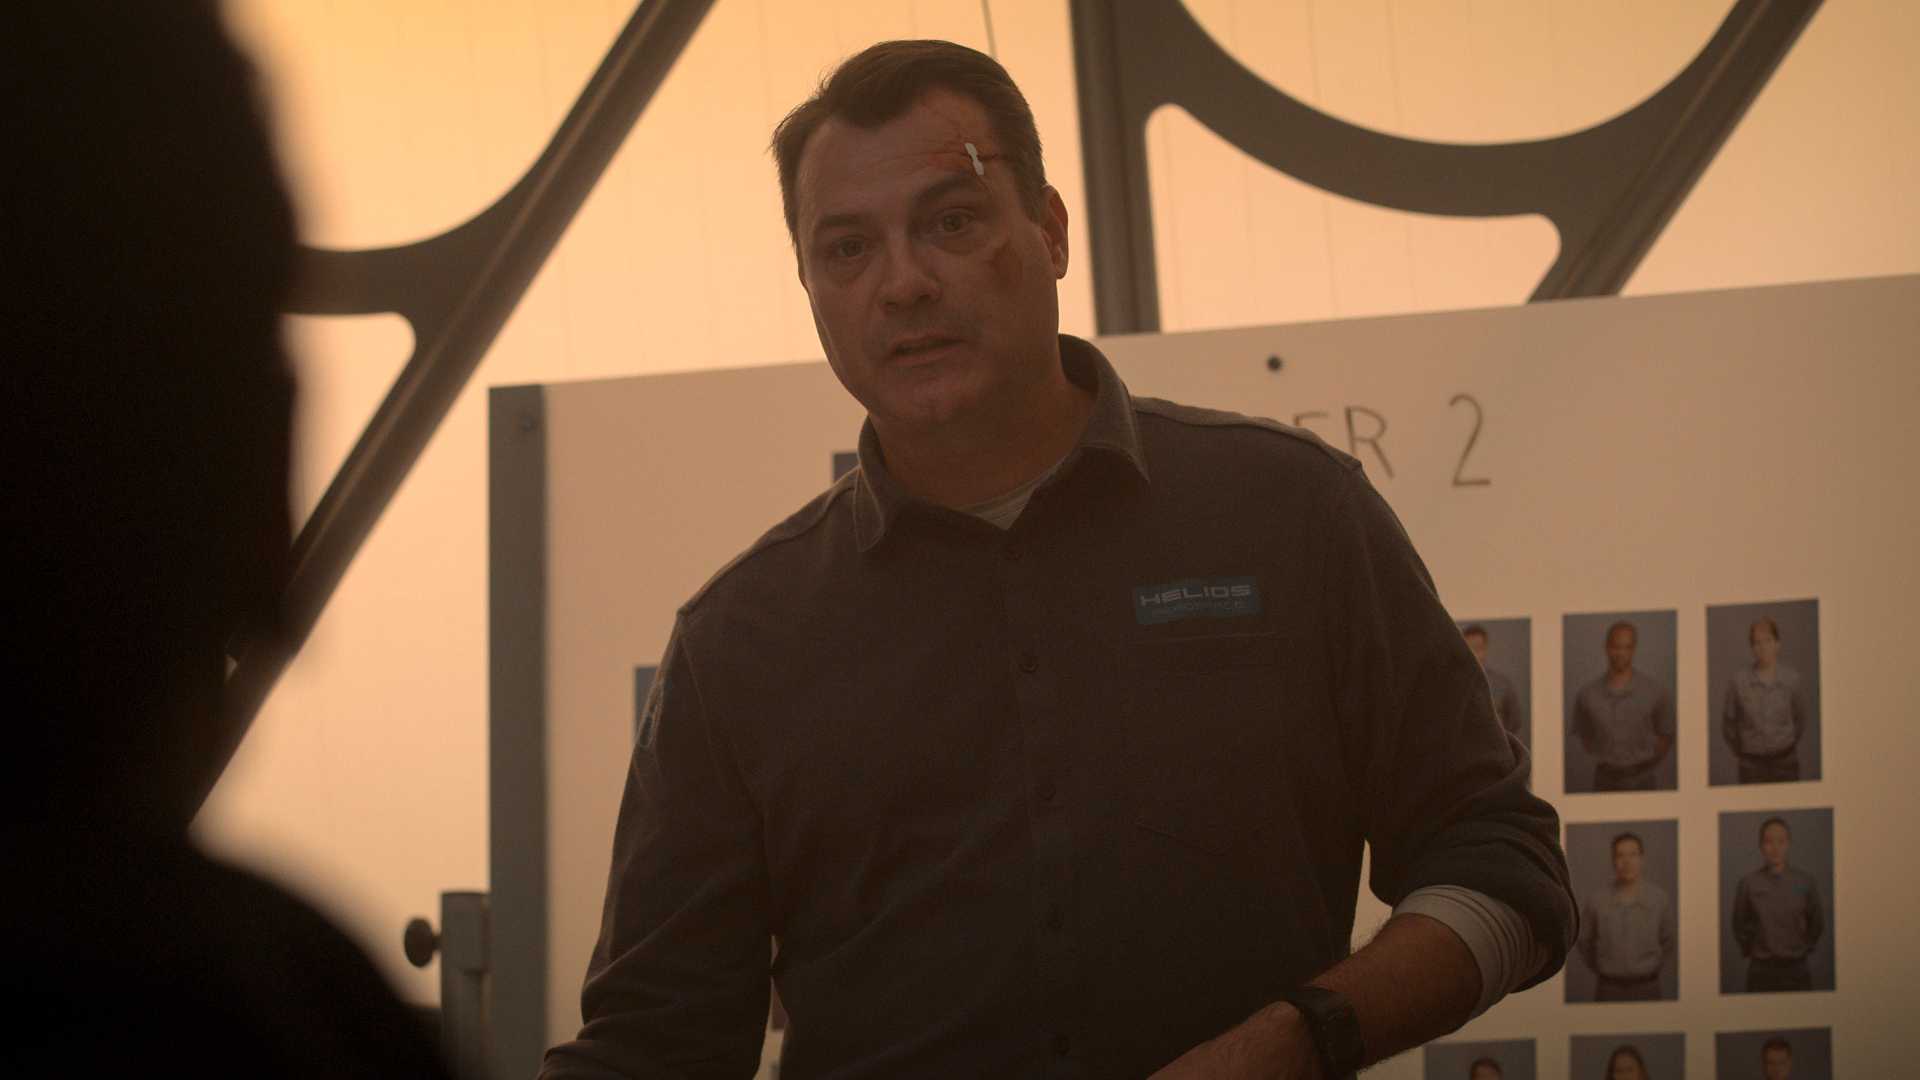 A man who has been roughed up (bruise on cheek, stitches on eyebrow) is standing in front of a whiteboard with several images of other crew members.